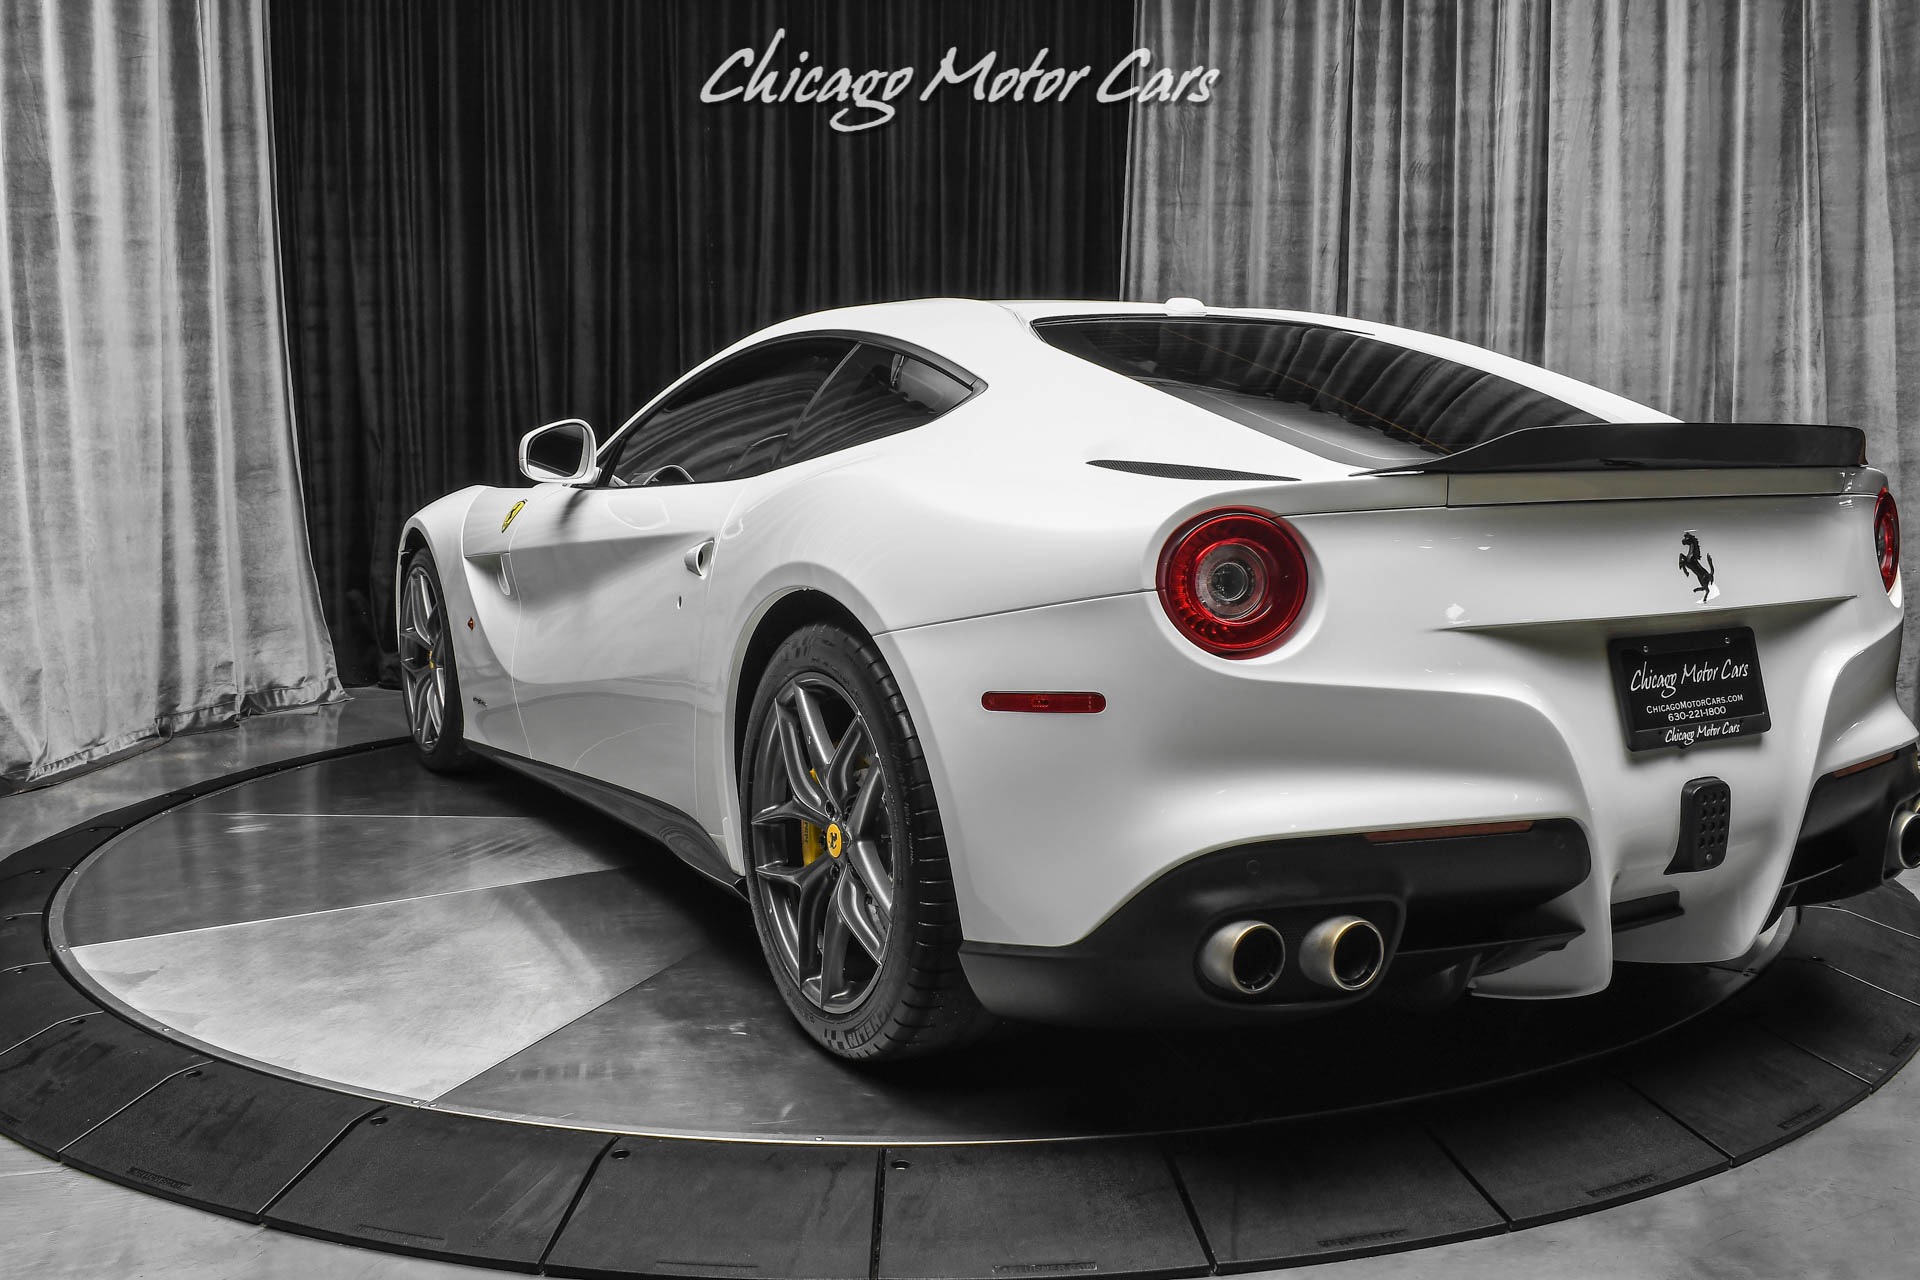 Used-2014-Ferrari-F12berlinetta-Coupe-Original-440K-MSRP-LOADED-WITH-125k-IN-OPTIONS-TONS-OF-CARBON